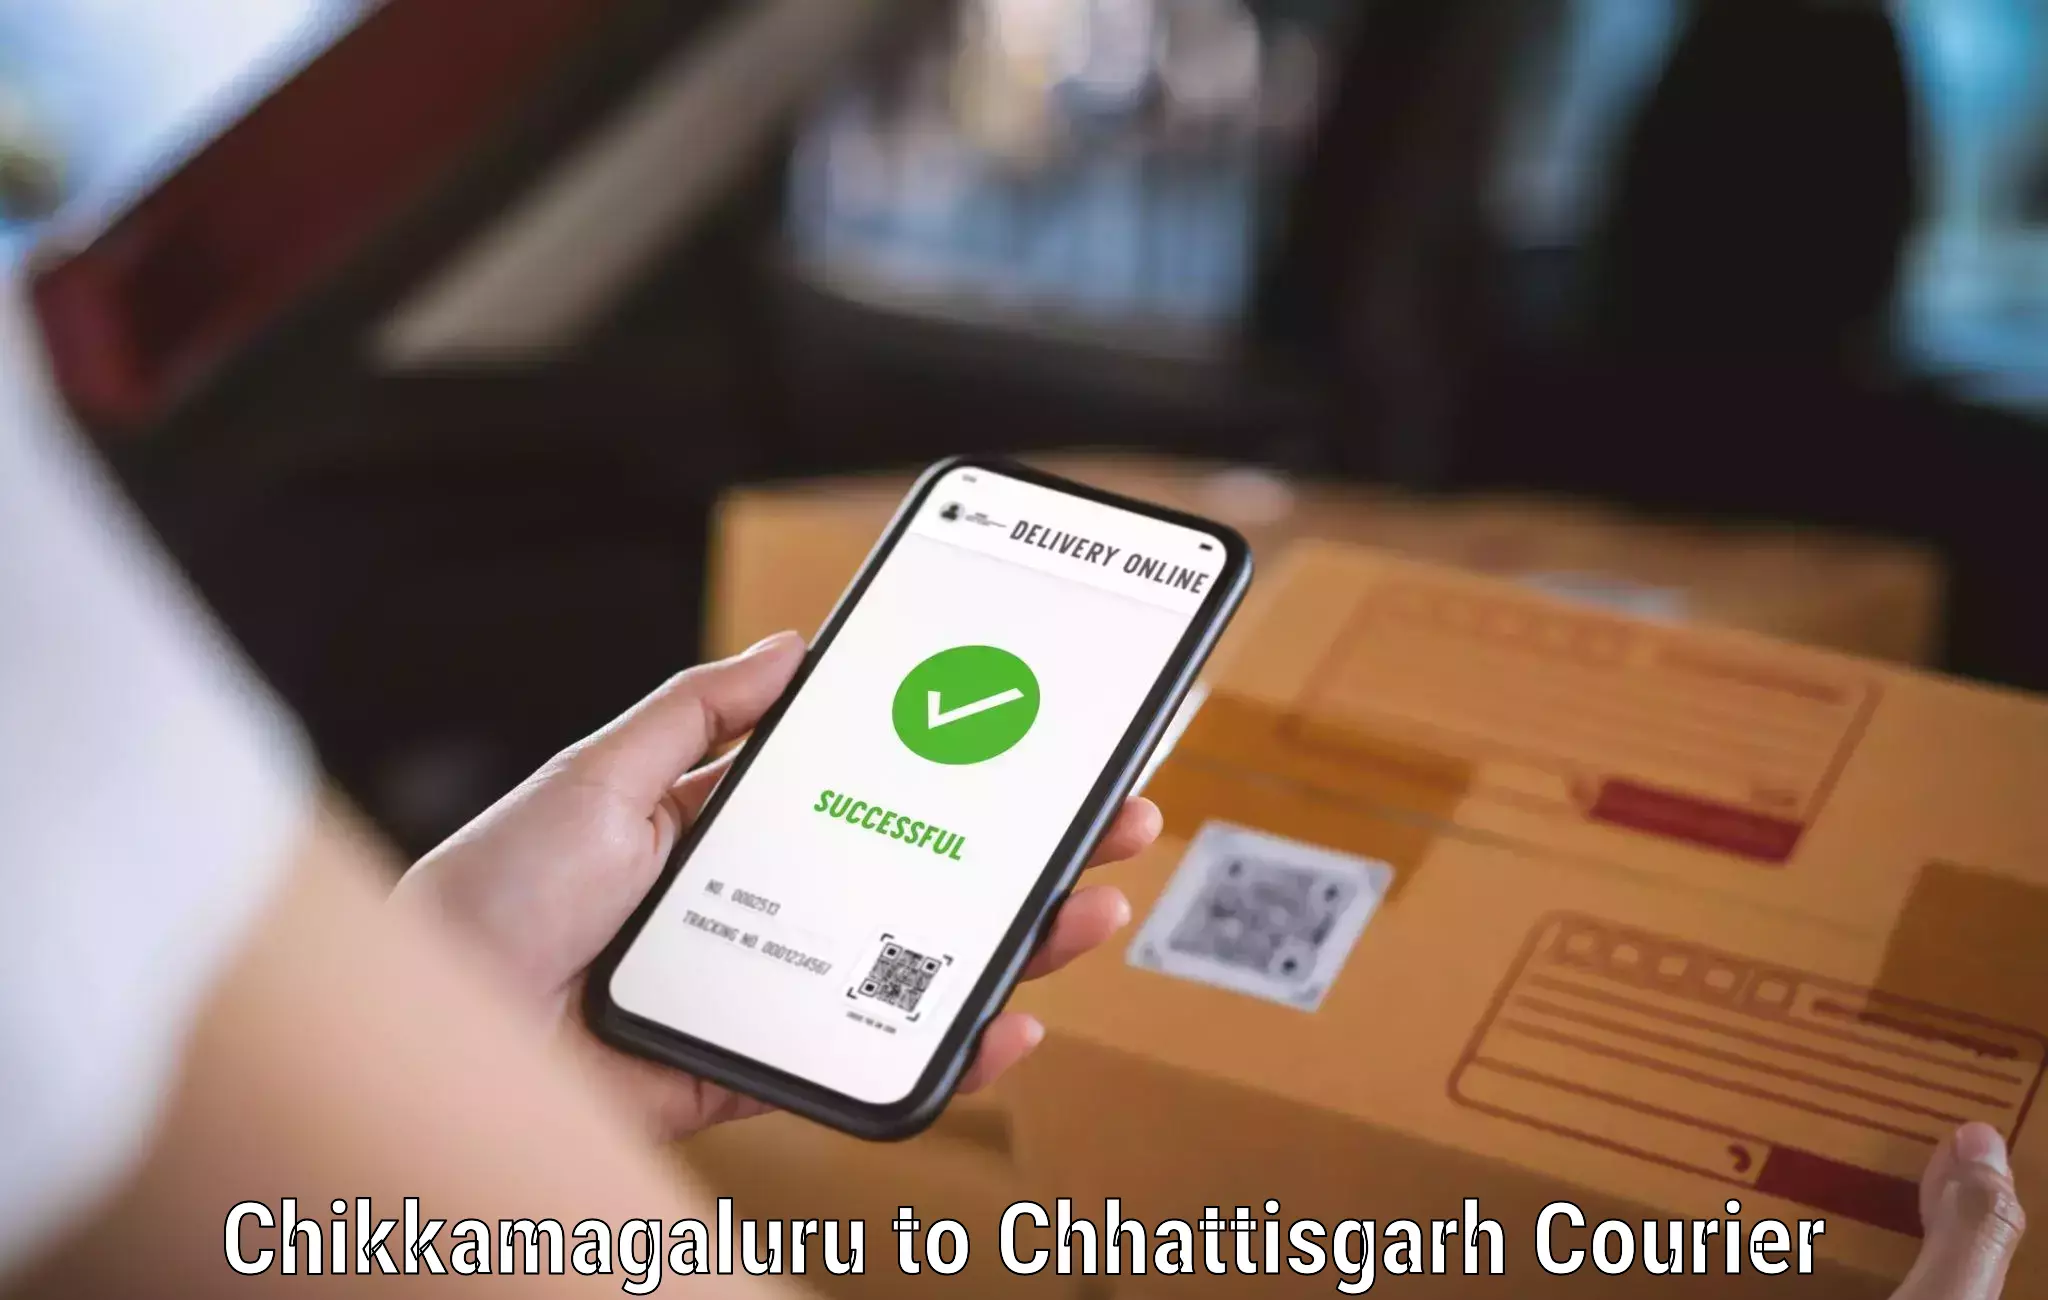 Fast delivery service Chikkamagaluru to Surguja